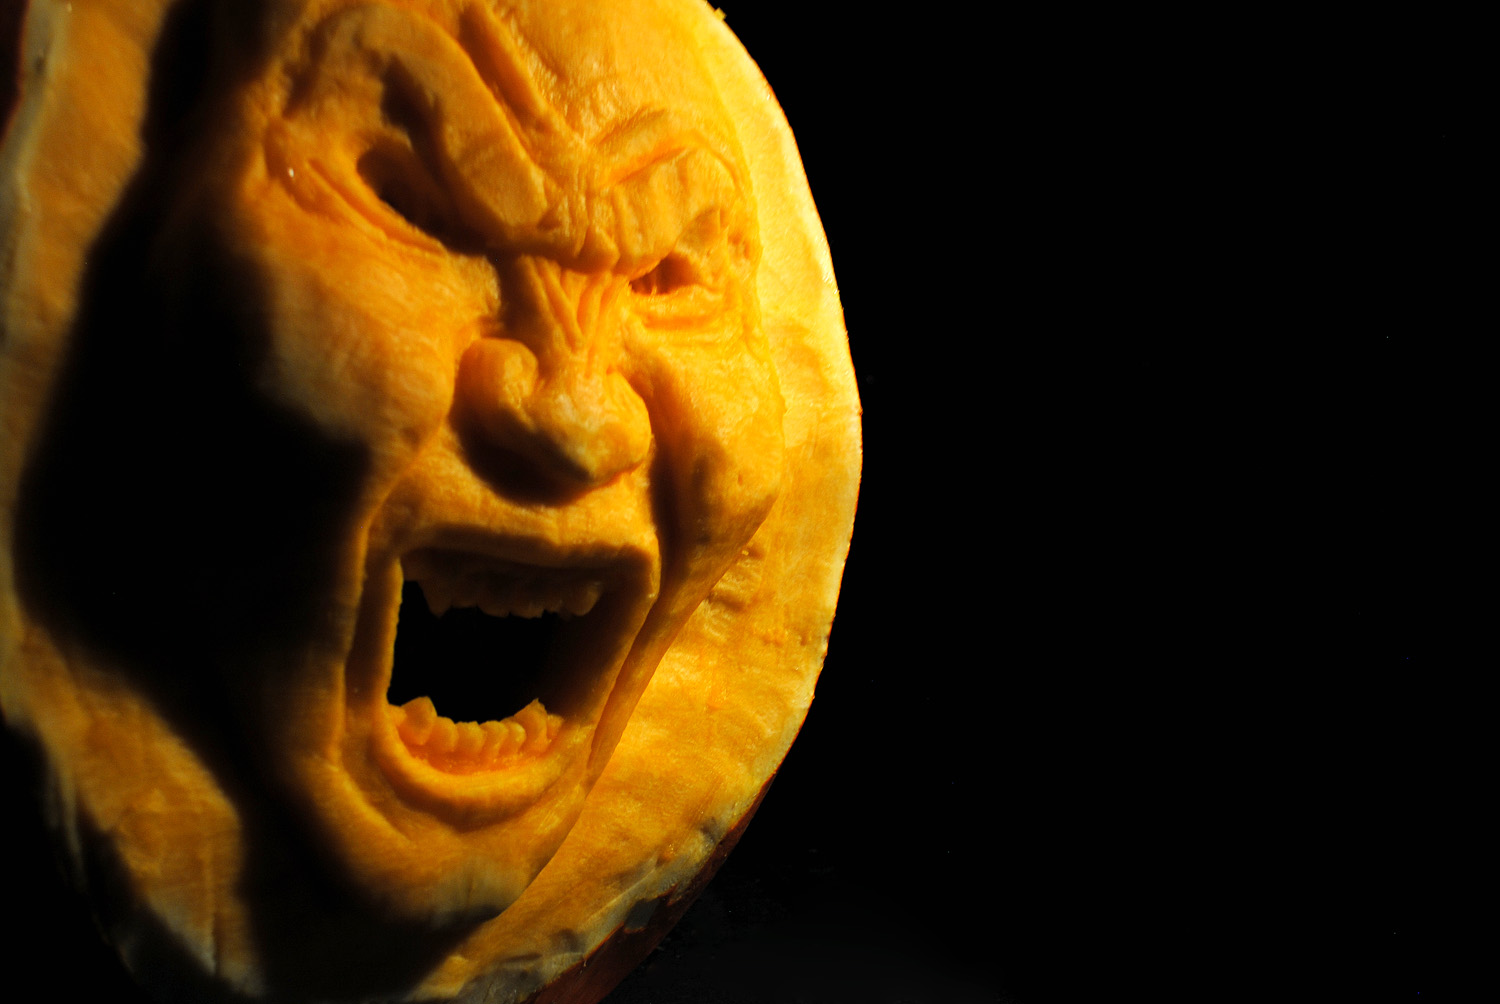 3D carved pumpkin face from Smith the Pumpkin Carver